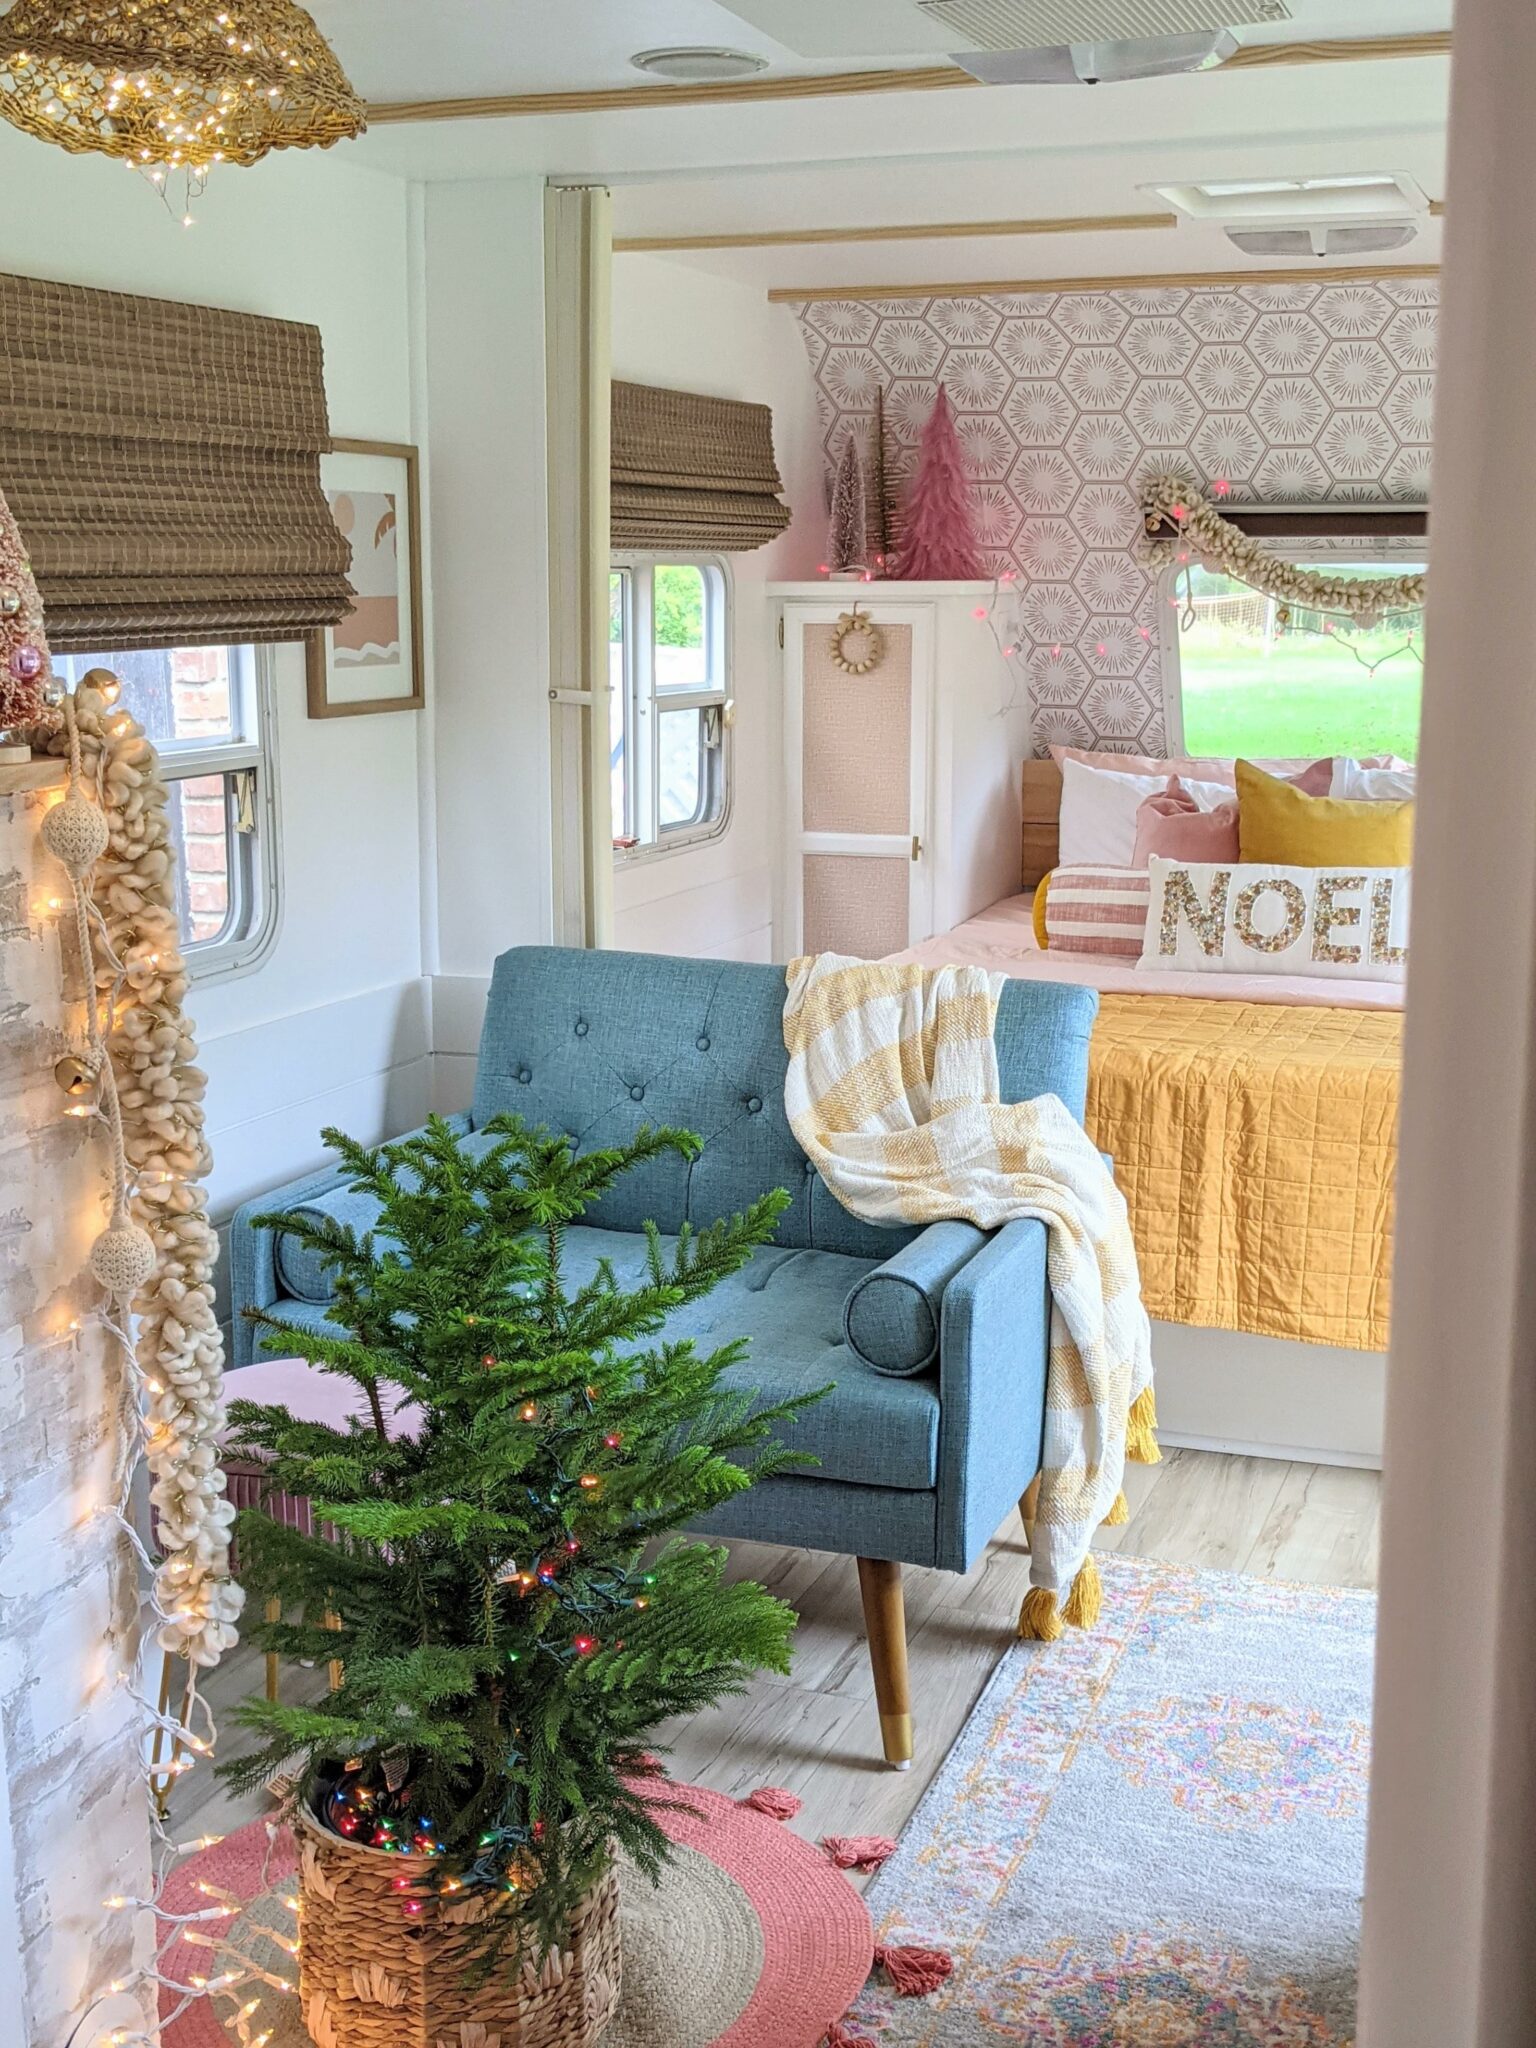 Colorful and Fun Christmas Decorations in the Renovated Camper All Things with Purpose Sarah Lemp 3